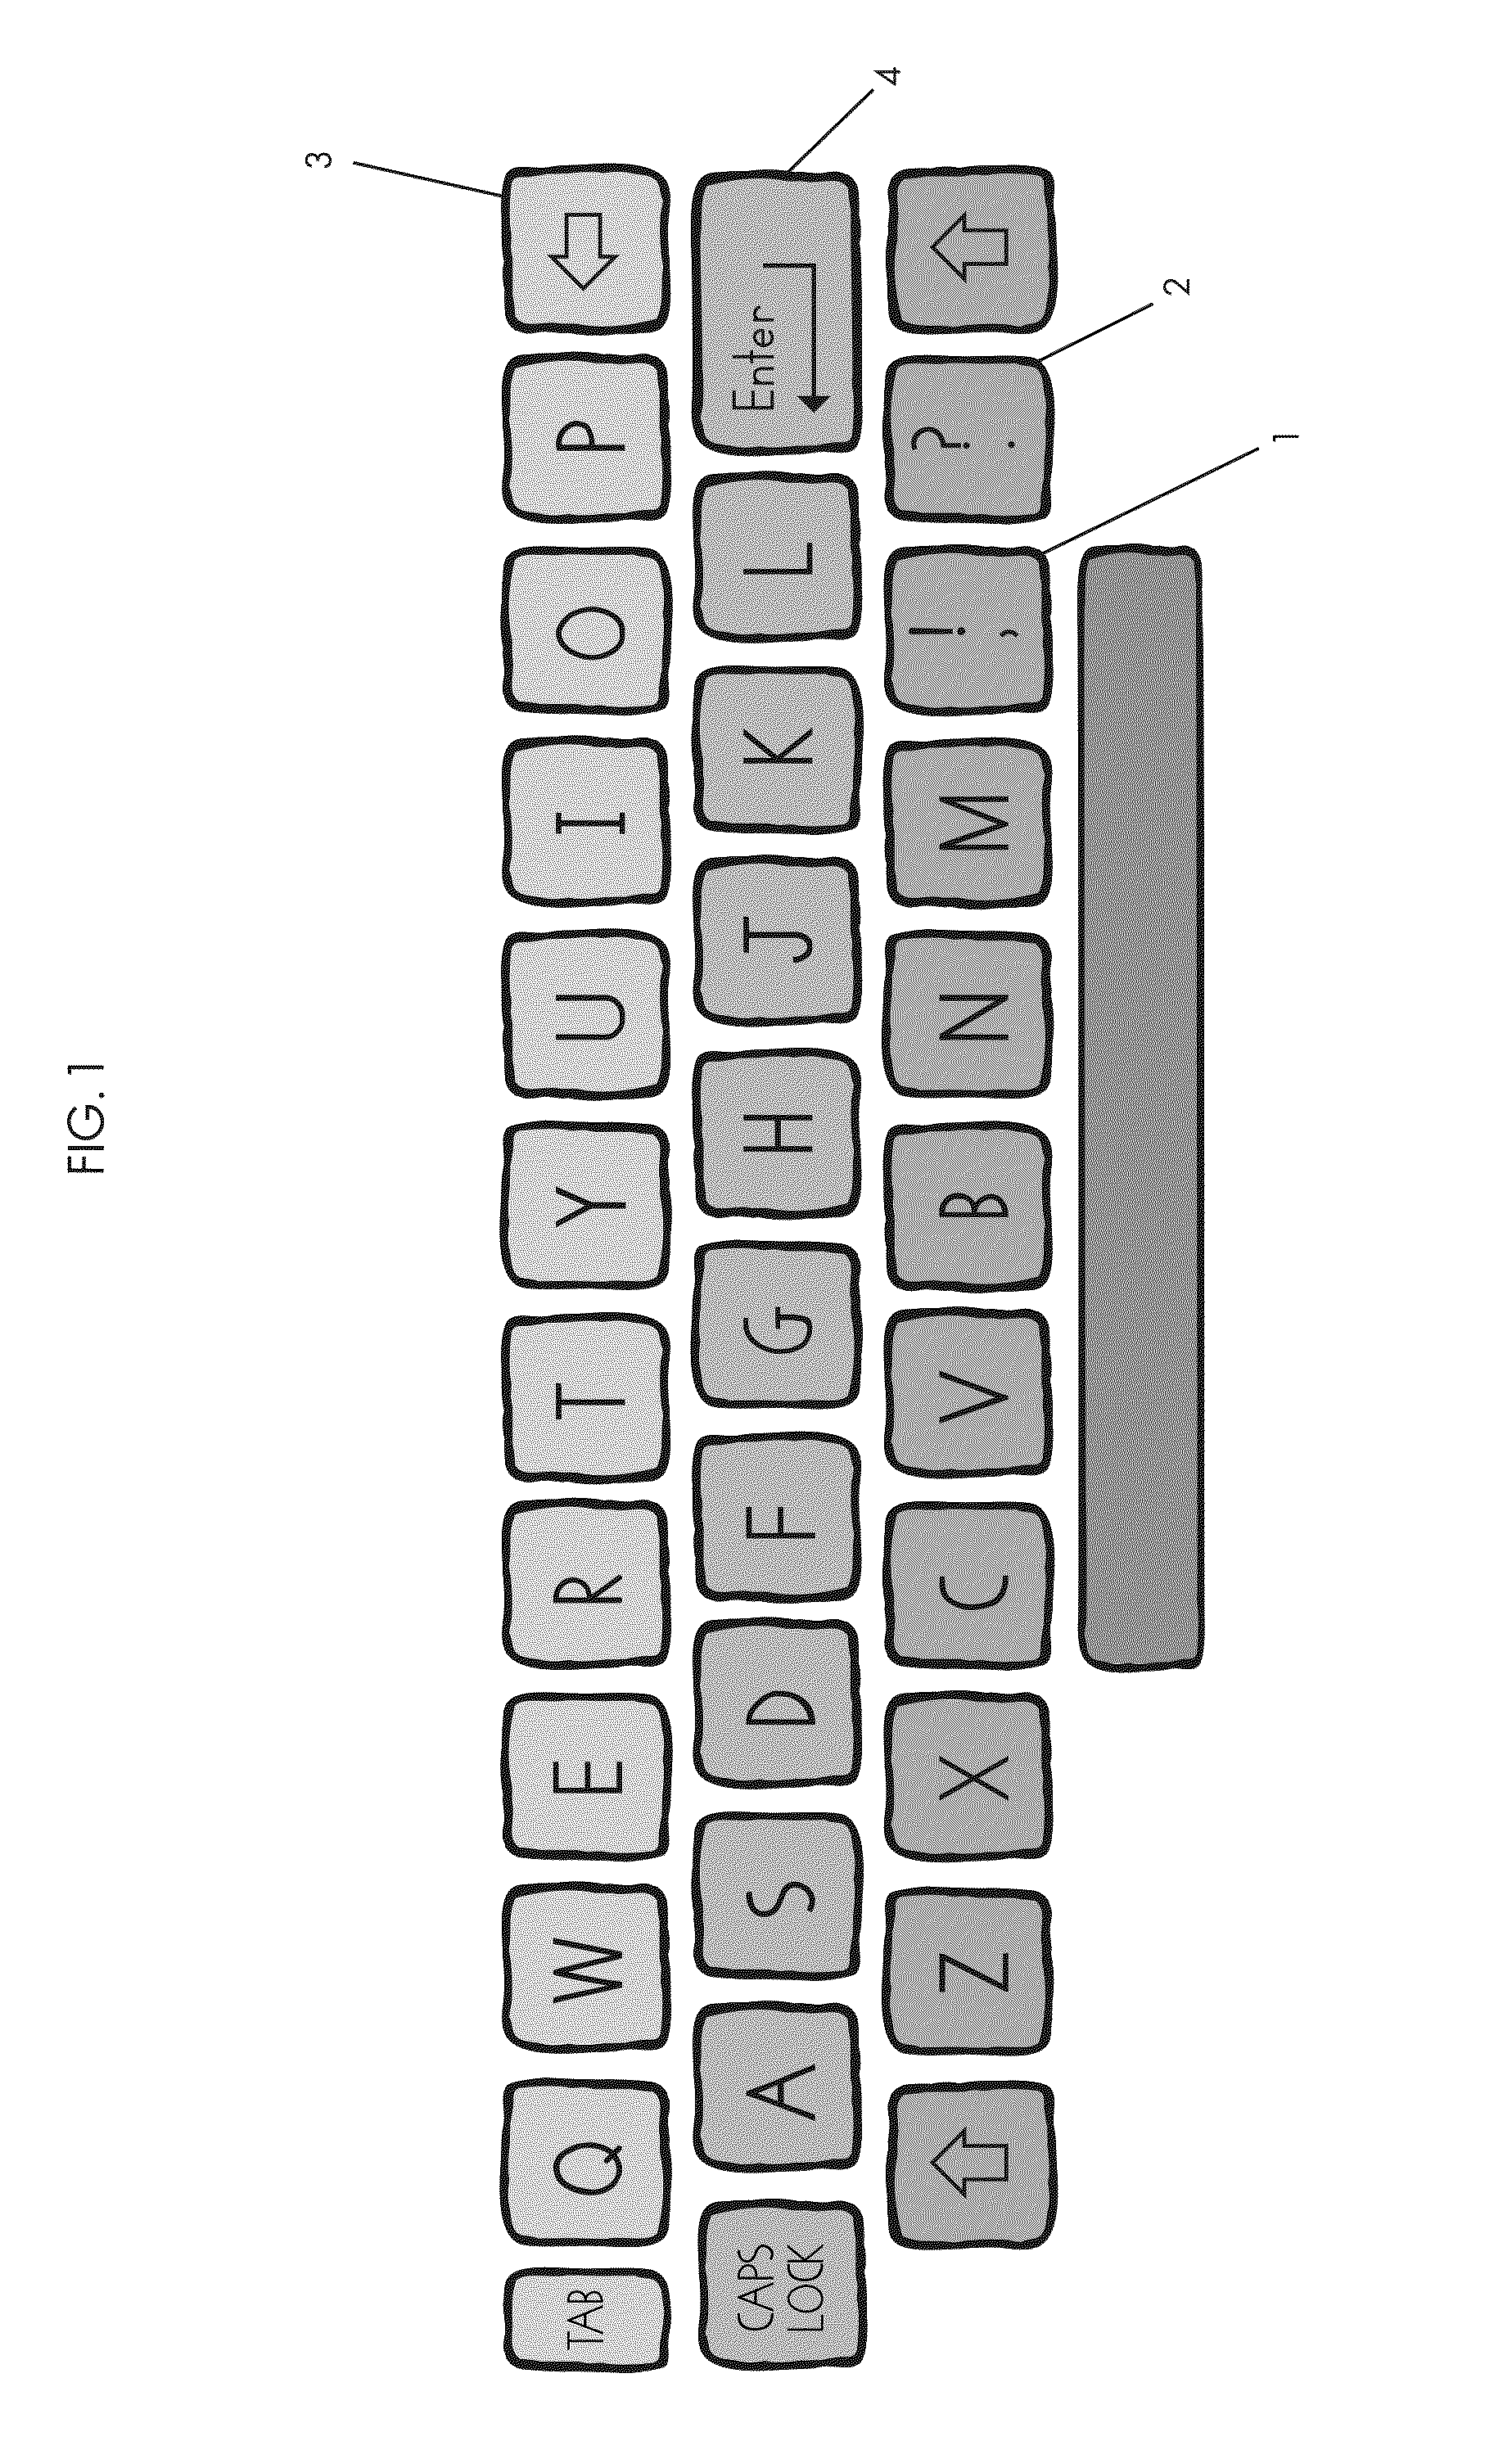 System and method for teaching pre-keyboarding and keyboarding